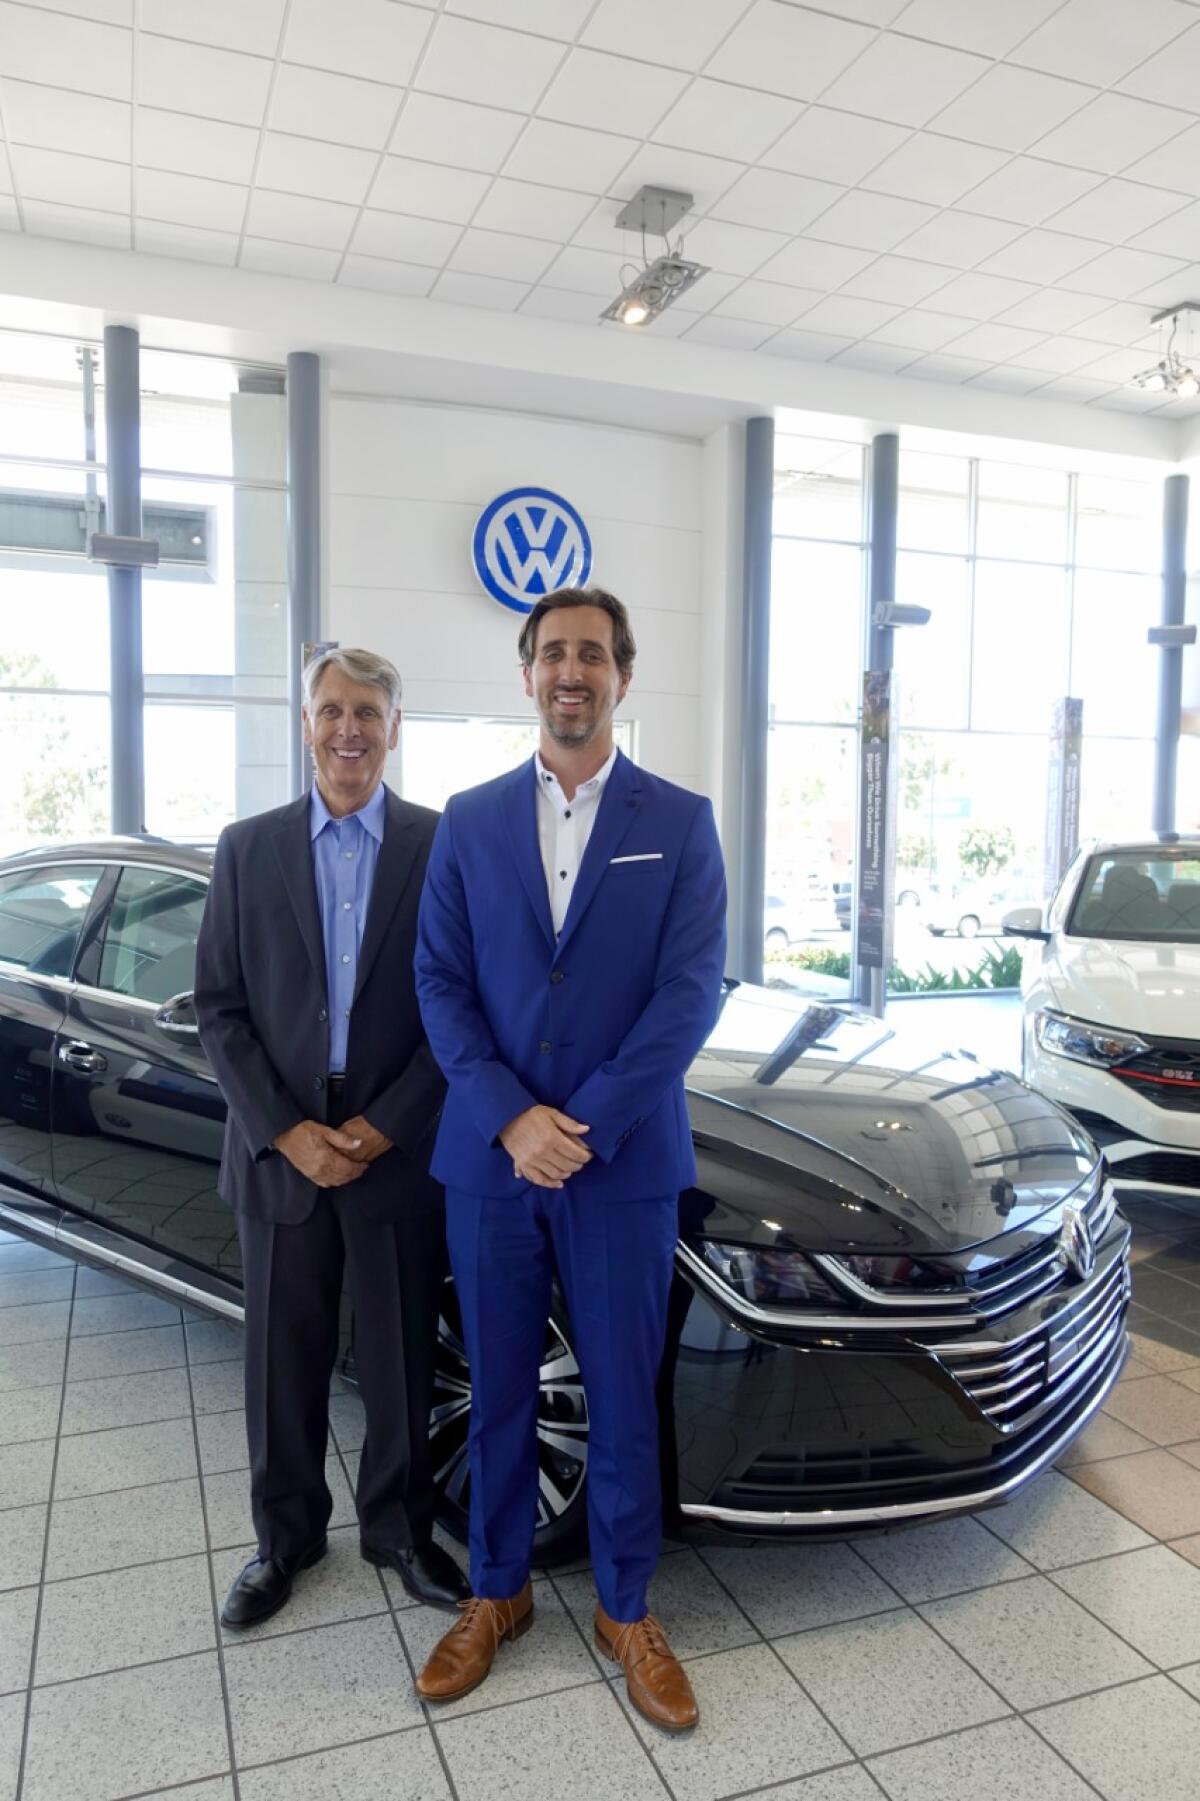 Owner Dennis Cook and General Manager Connor Cook stand in the showroom of Herman Cook Volkswagen.